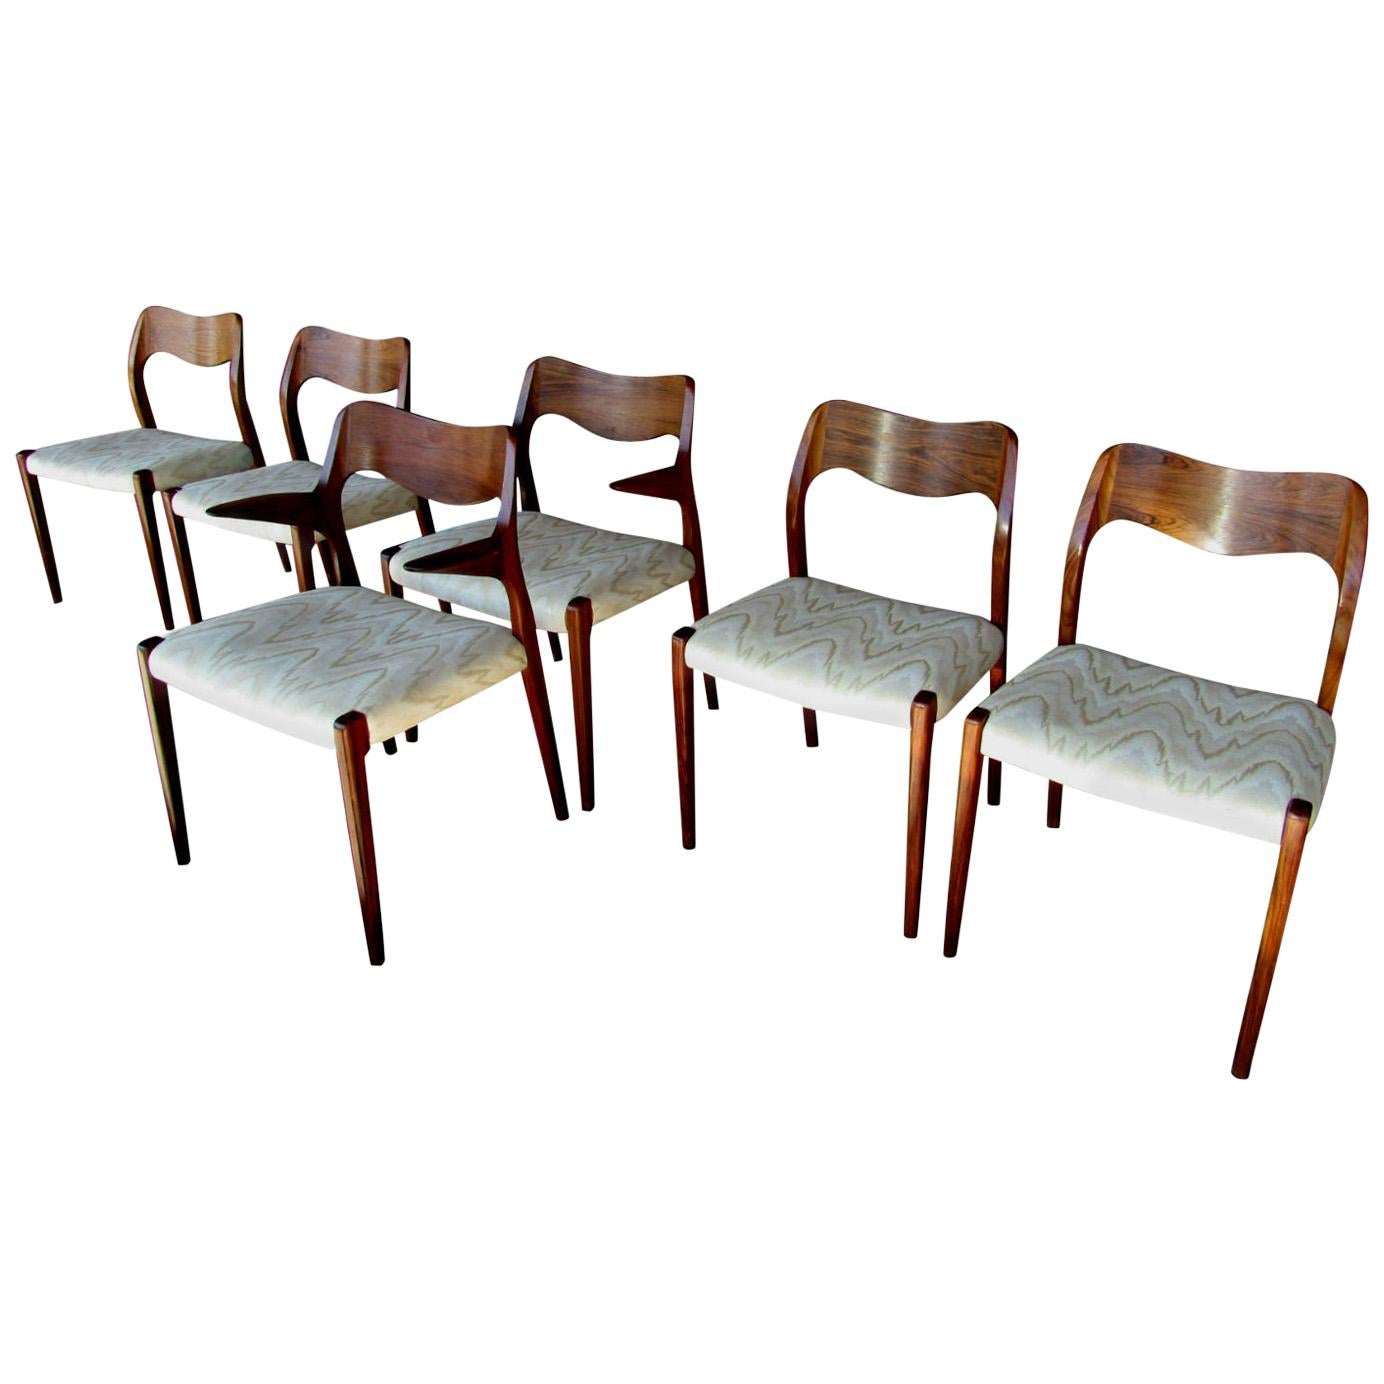 Niels Moller Rosewood Dining Chairs set of 6